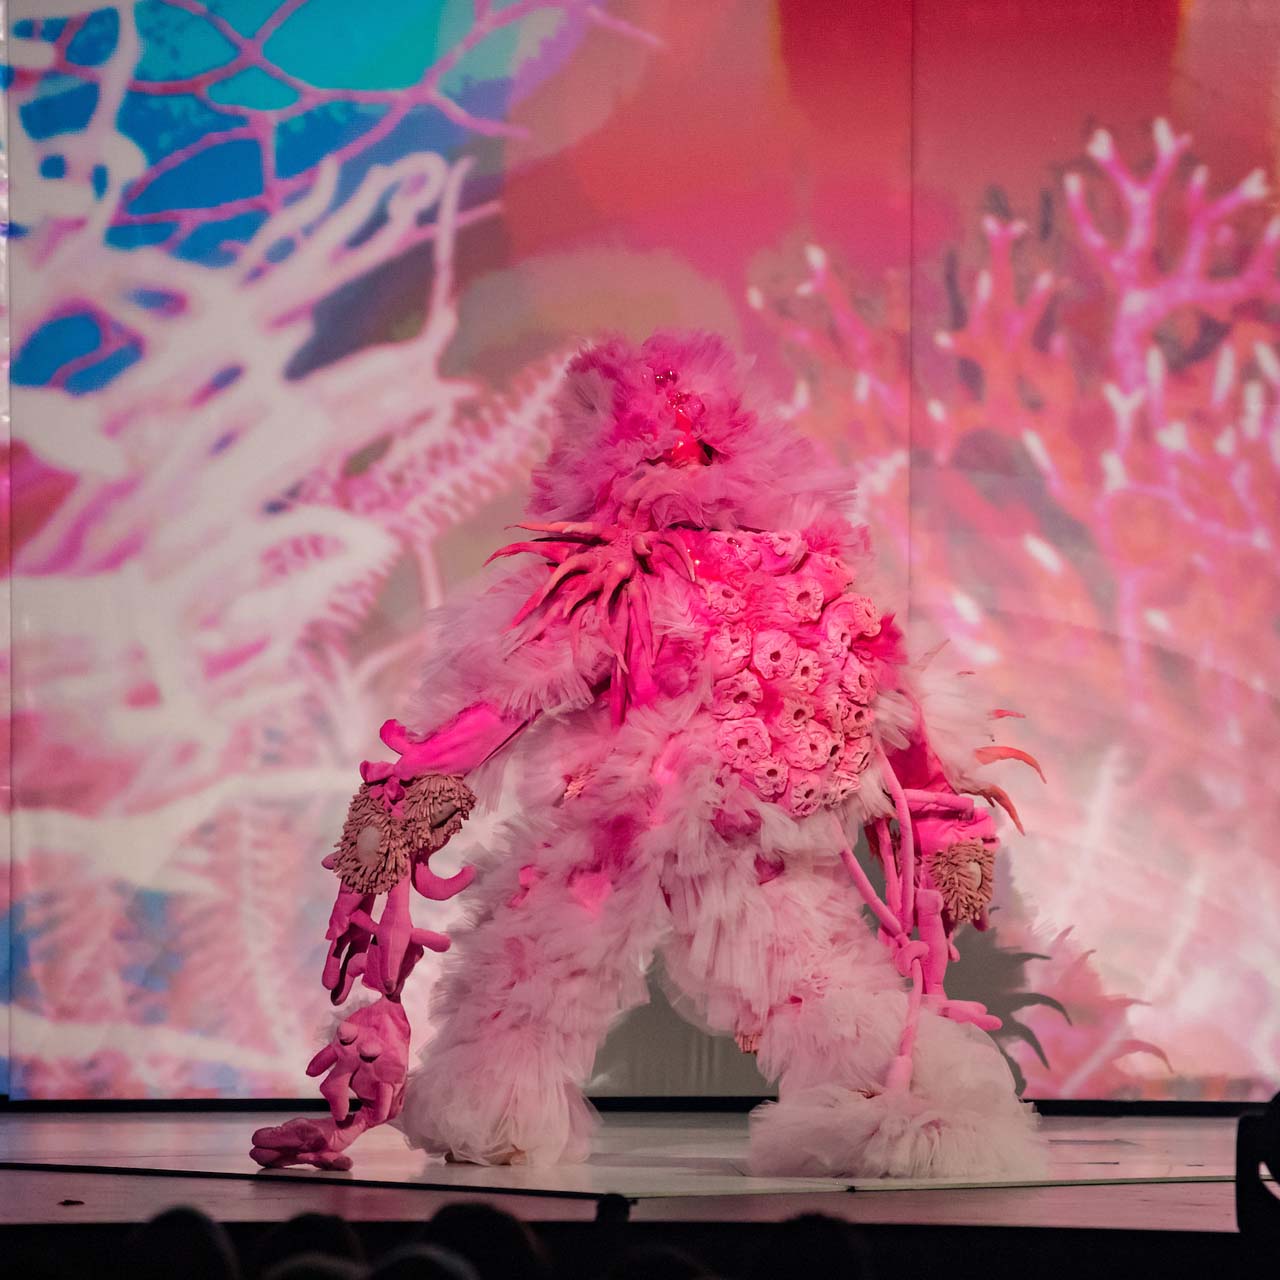 Coral Cluster photo World of WearableArt 2018